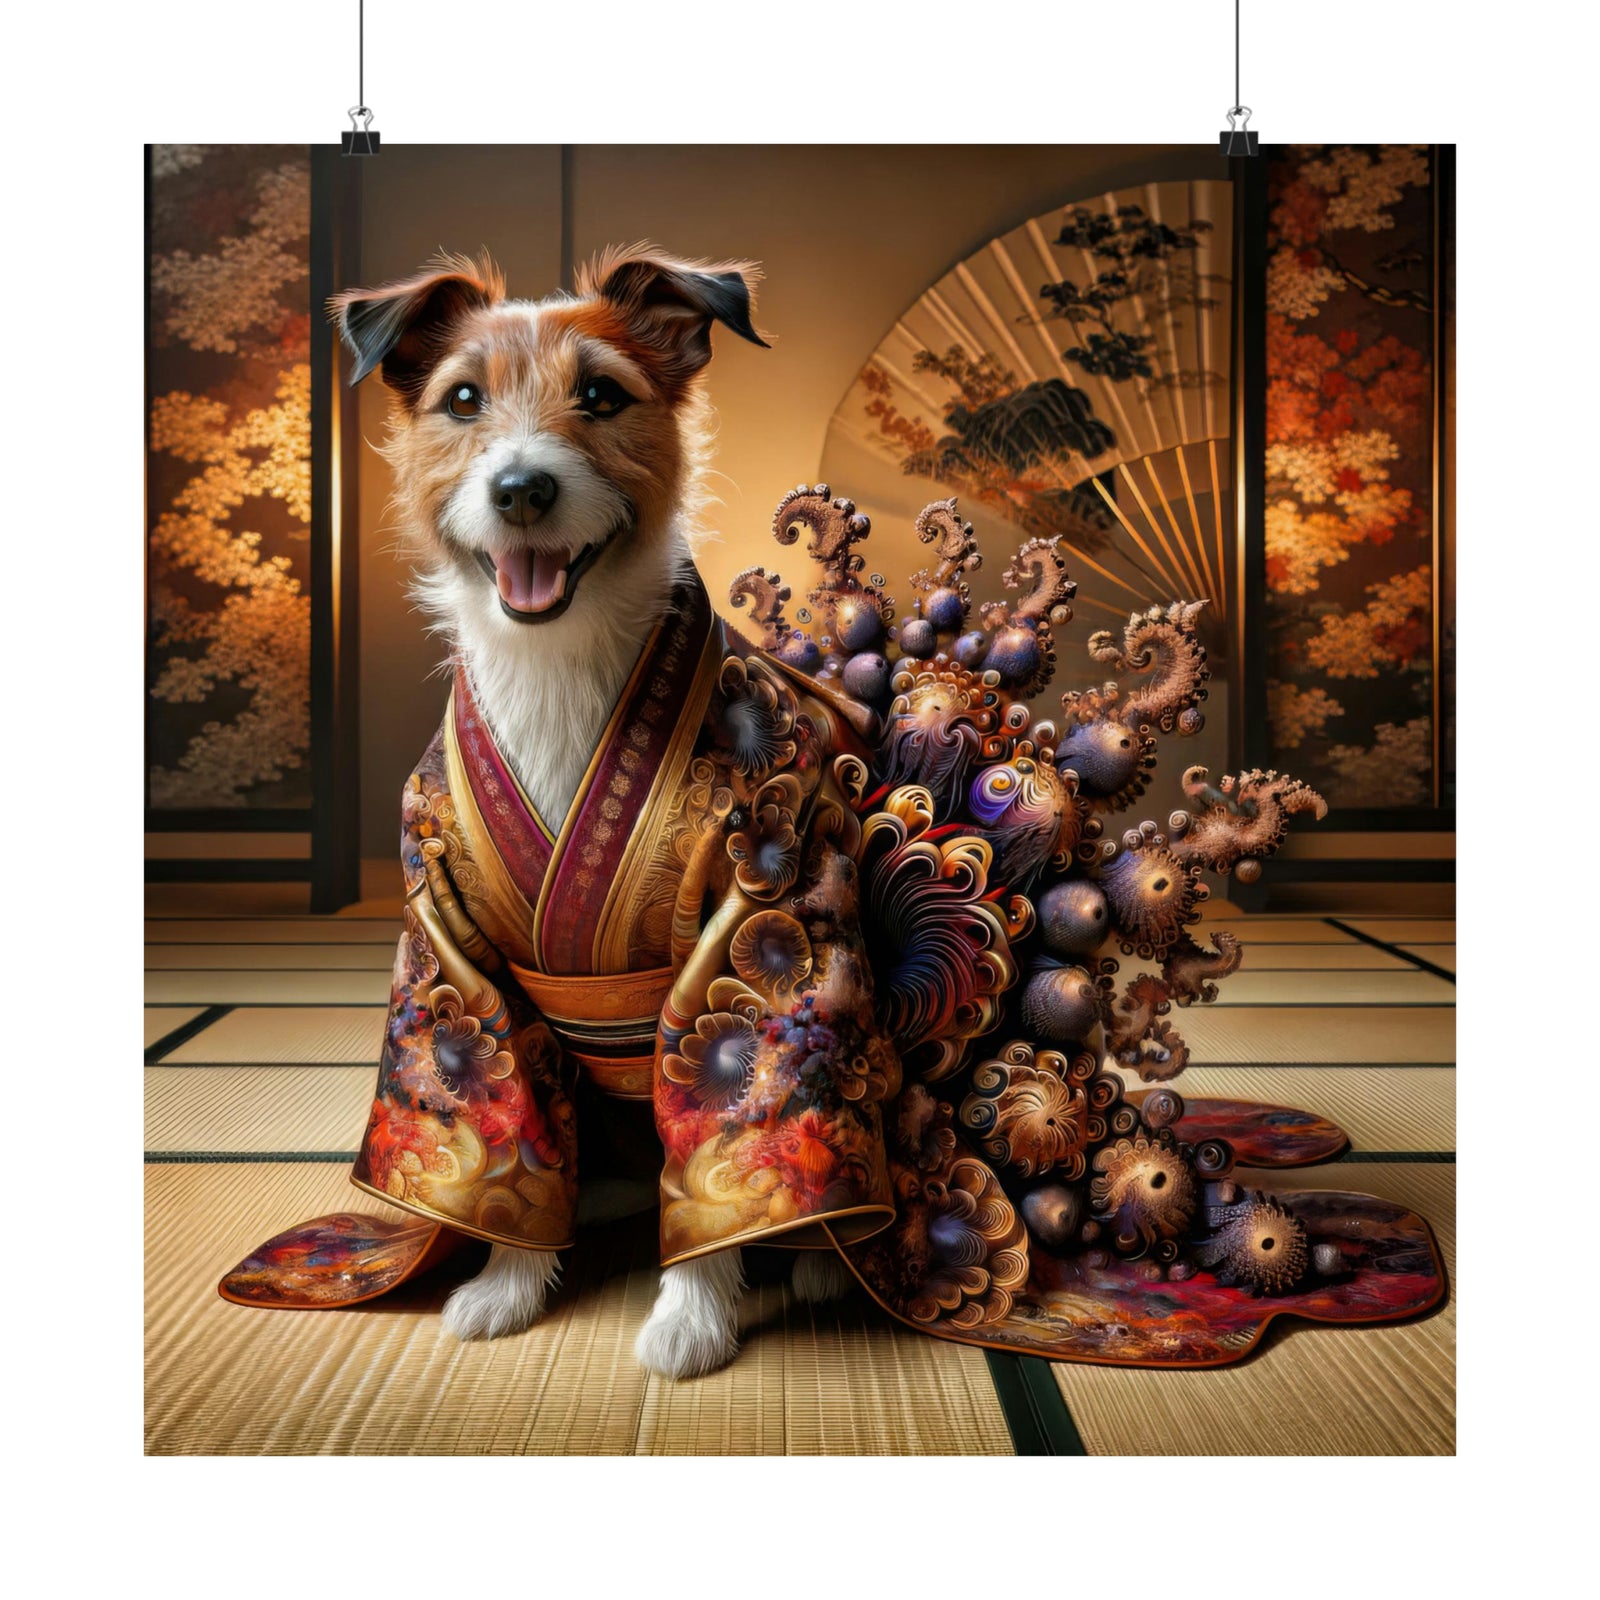 The Jack Russell’s Kimono Poster